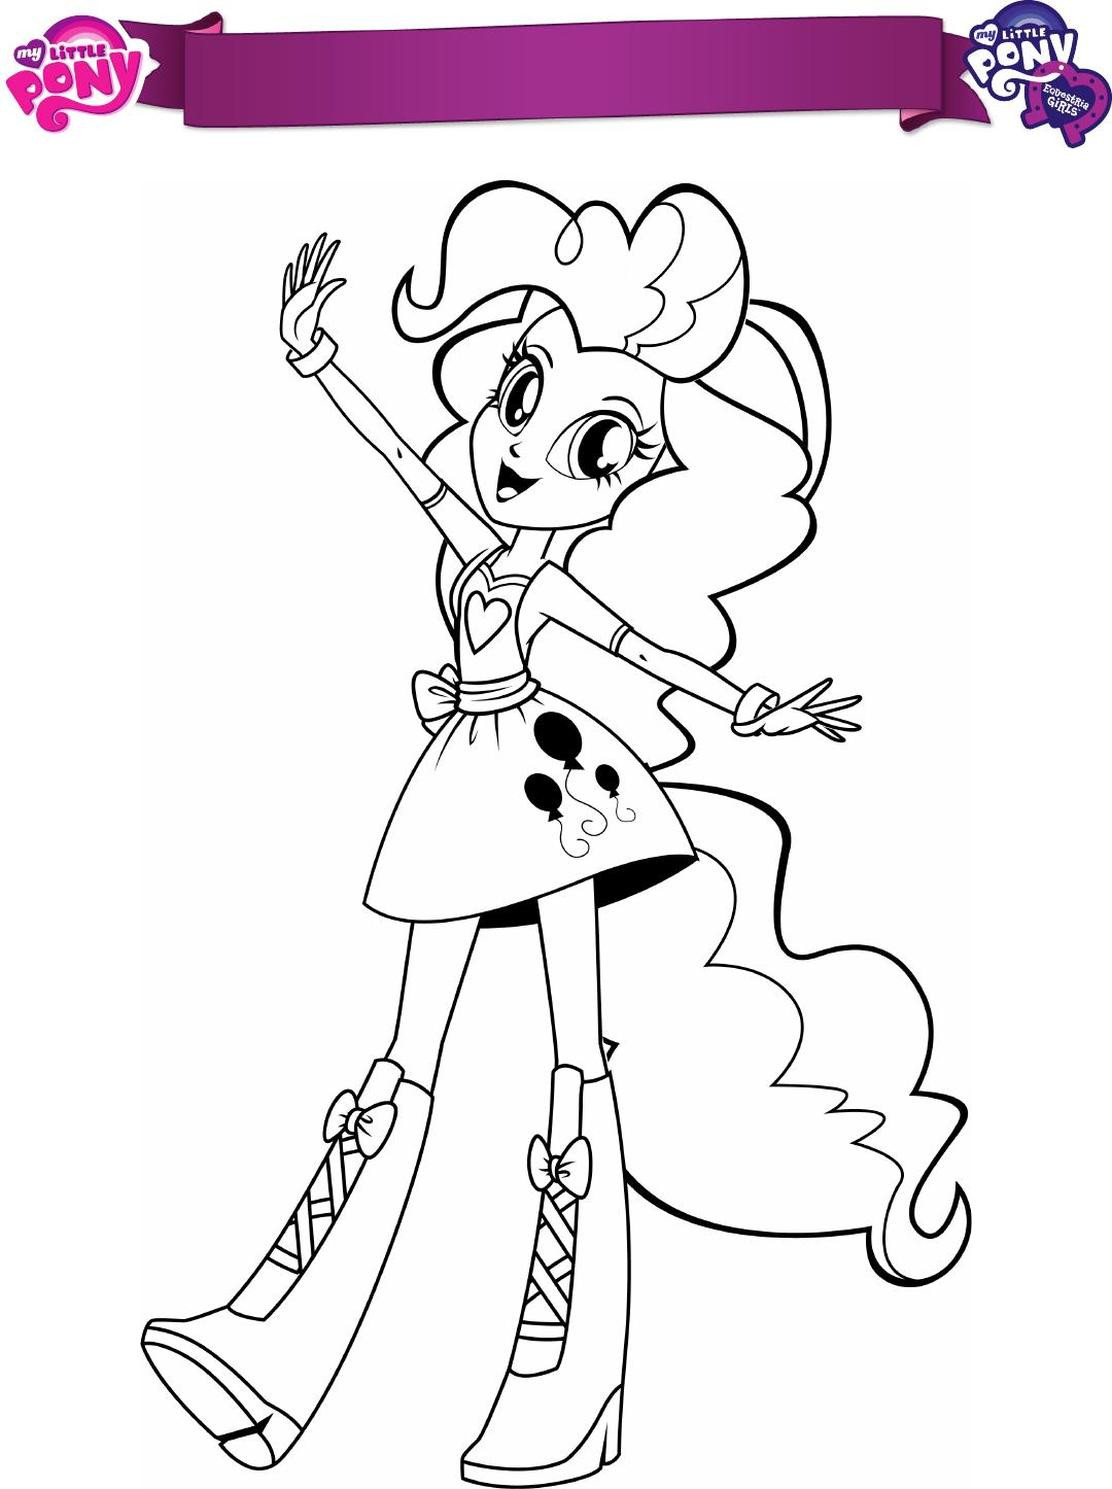 Equestria Girls Pinkie Pie Coloring Pages
 Get This Equestria Girls Coloring Pages Pony Pinkie Pie